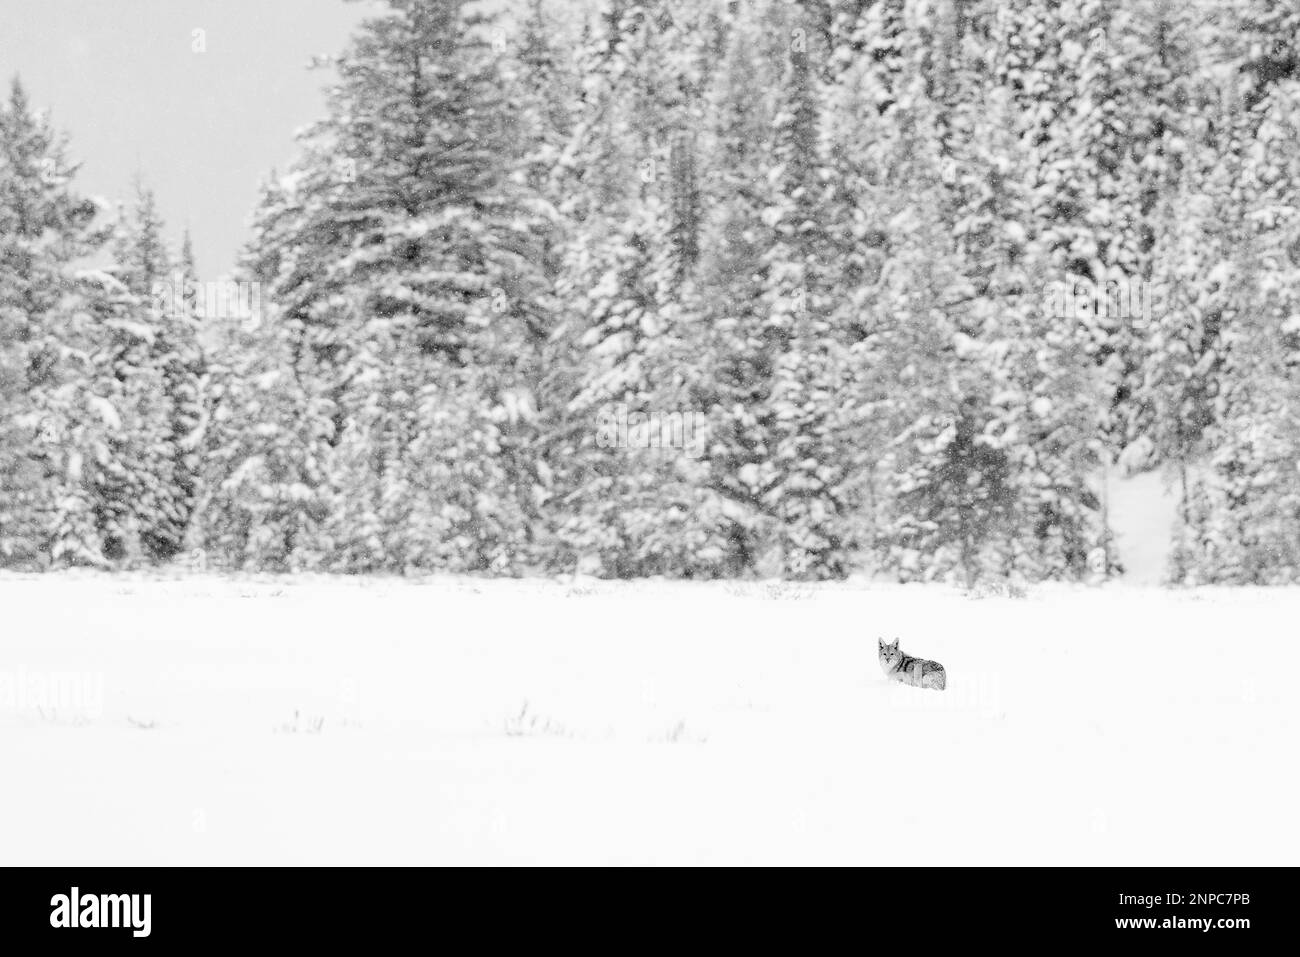 Lone Coyote on snow covered ground. Stock Photo